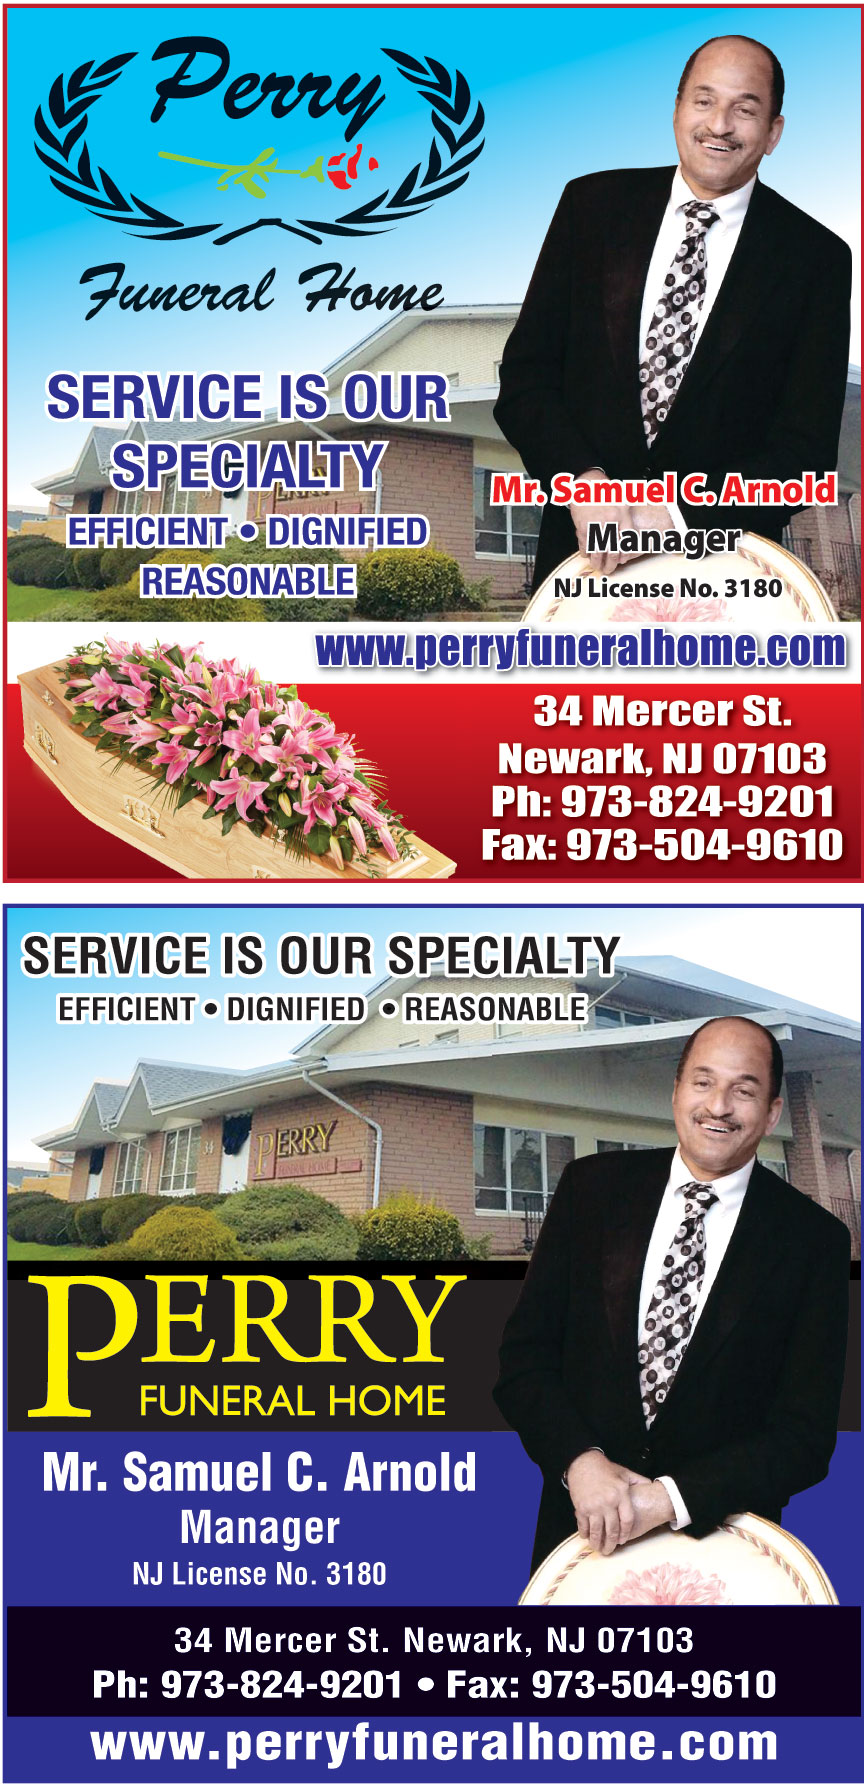 PERRY FUNERAL HOME